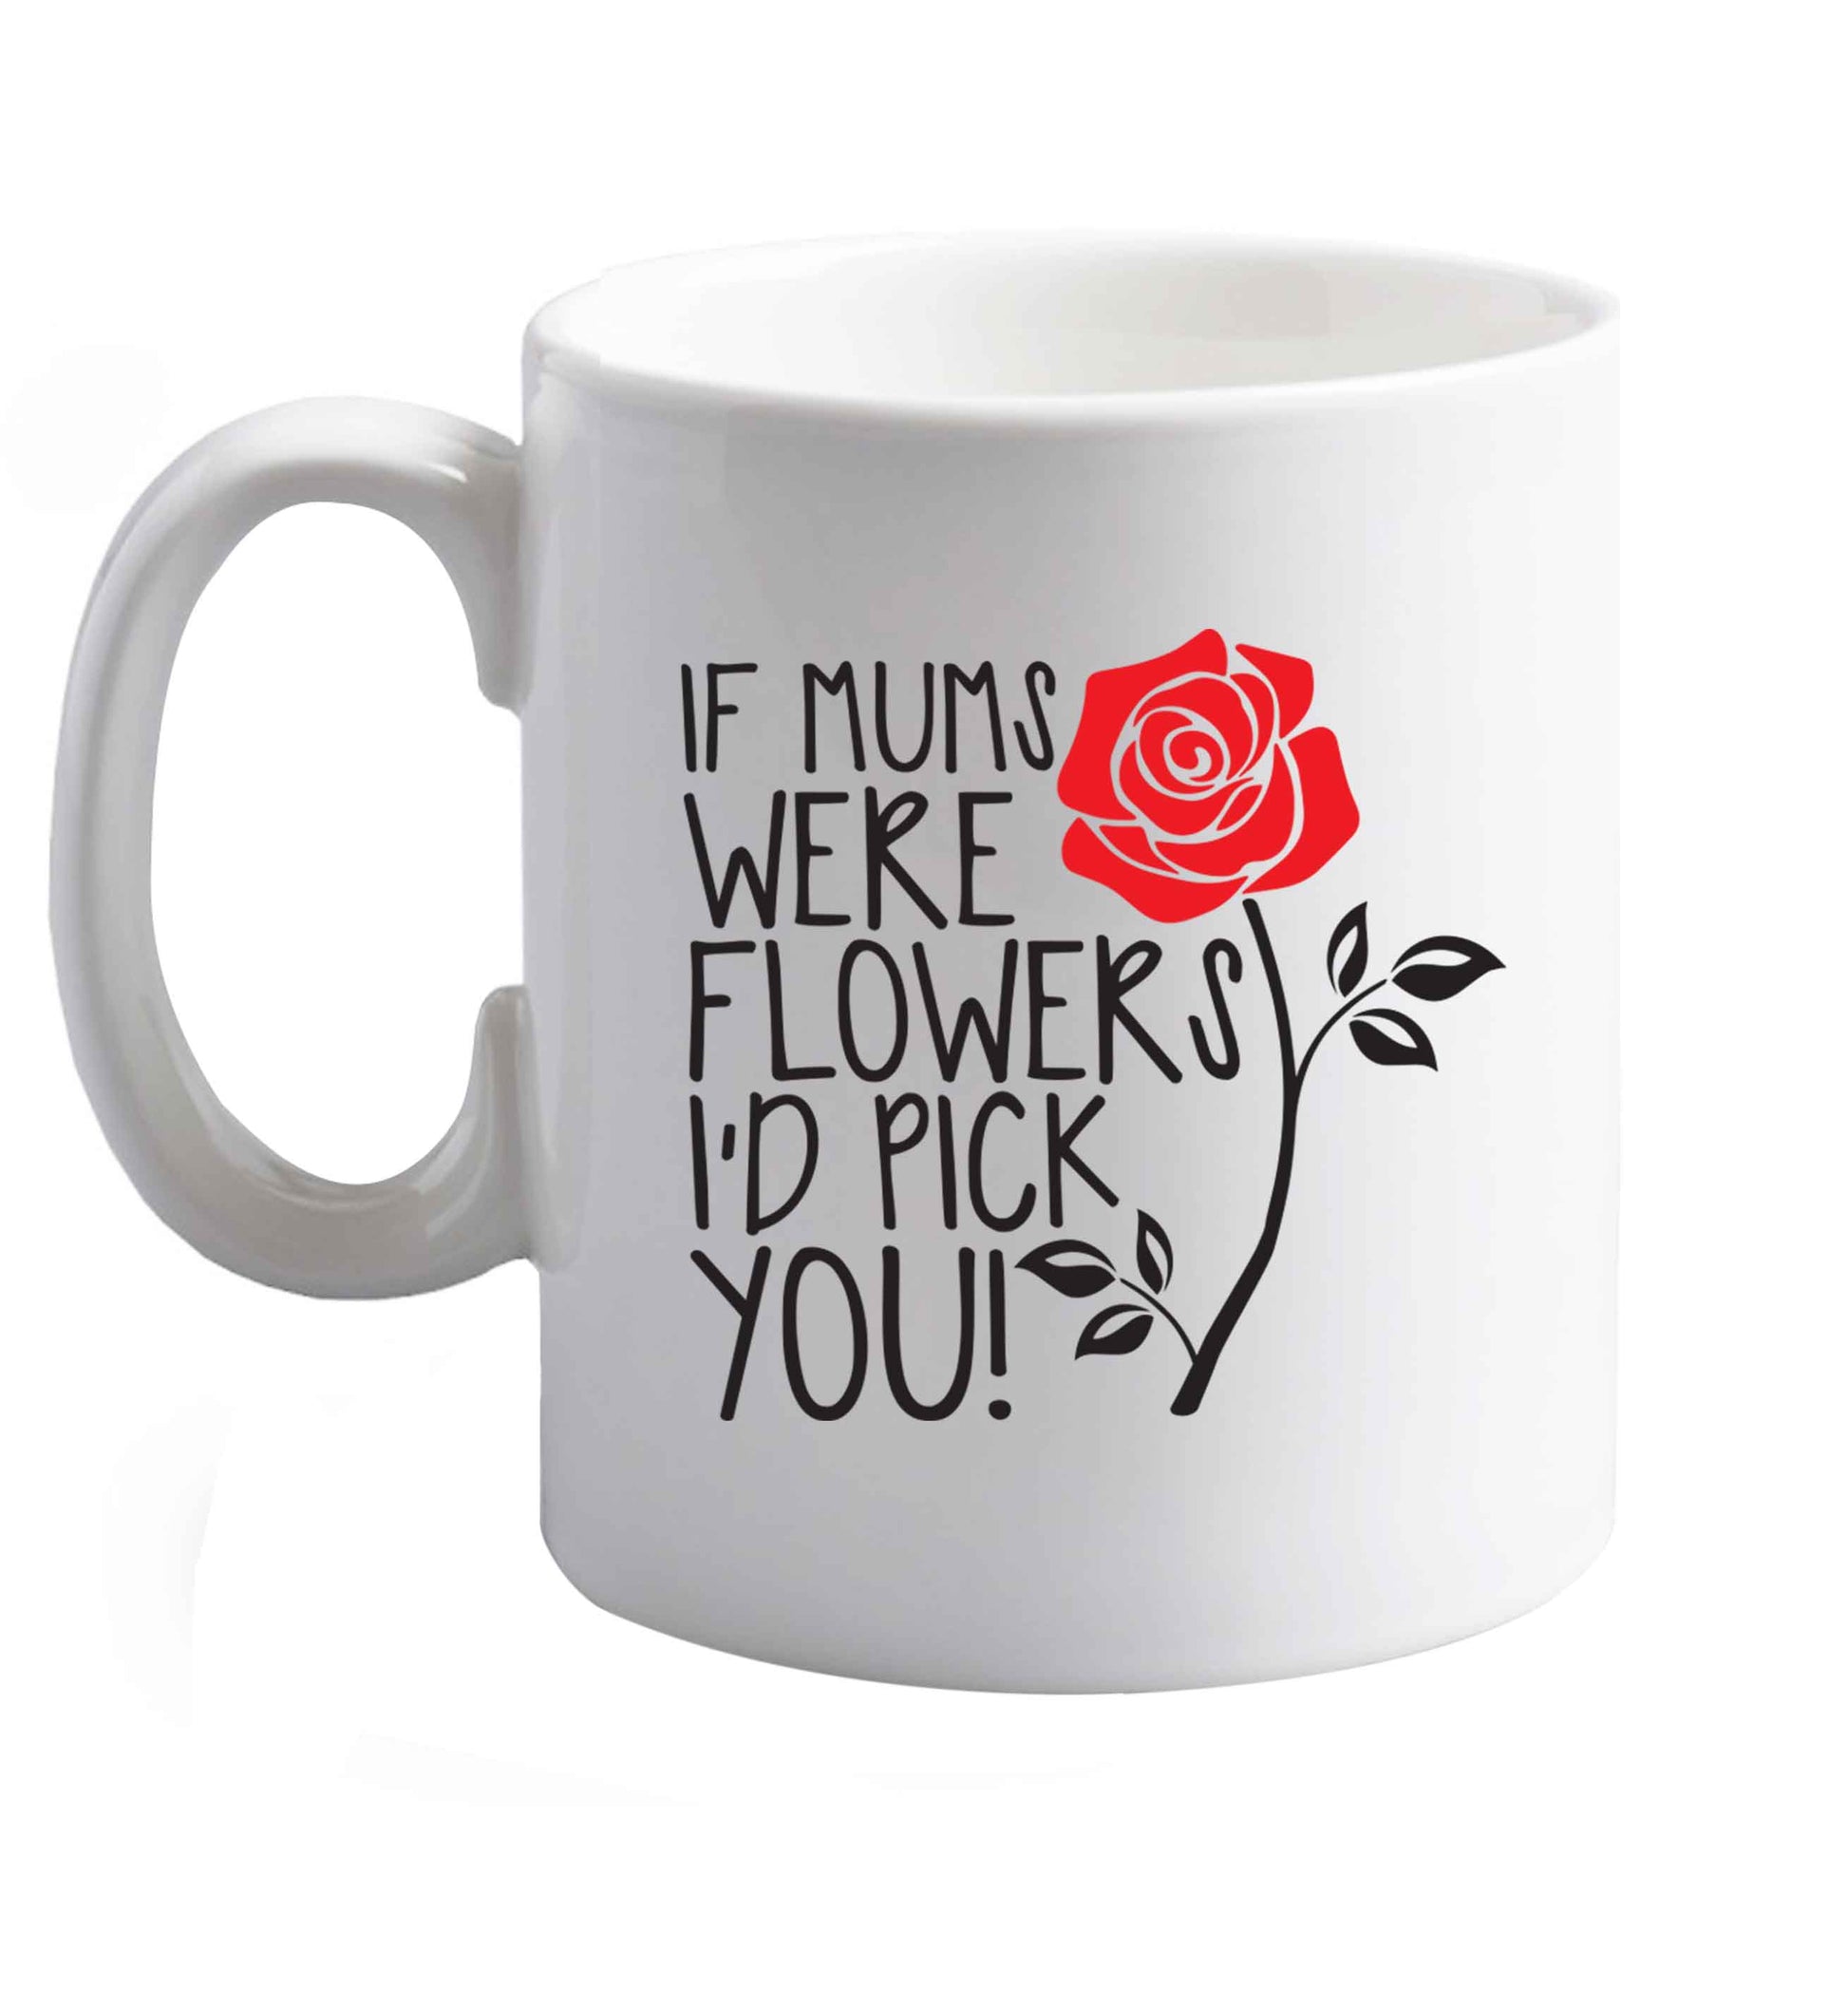 10 oz If mums were flowers I'd pick you! ceramic mug right handed